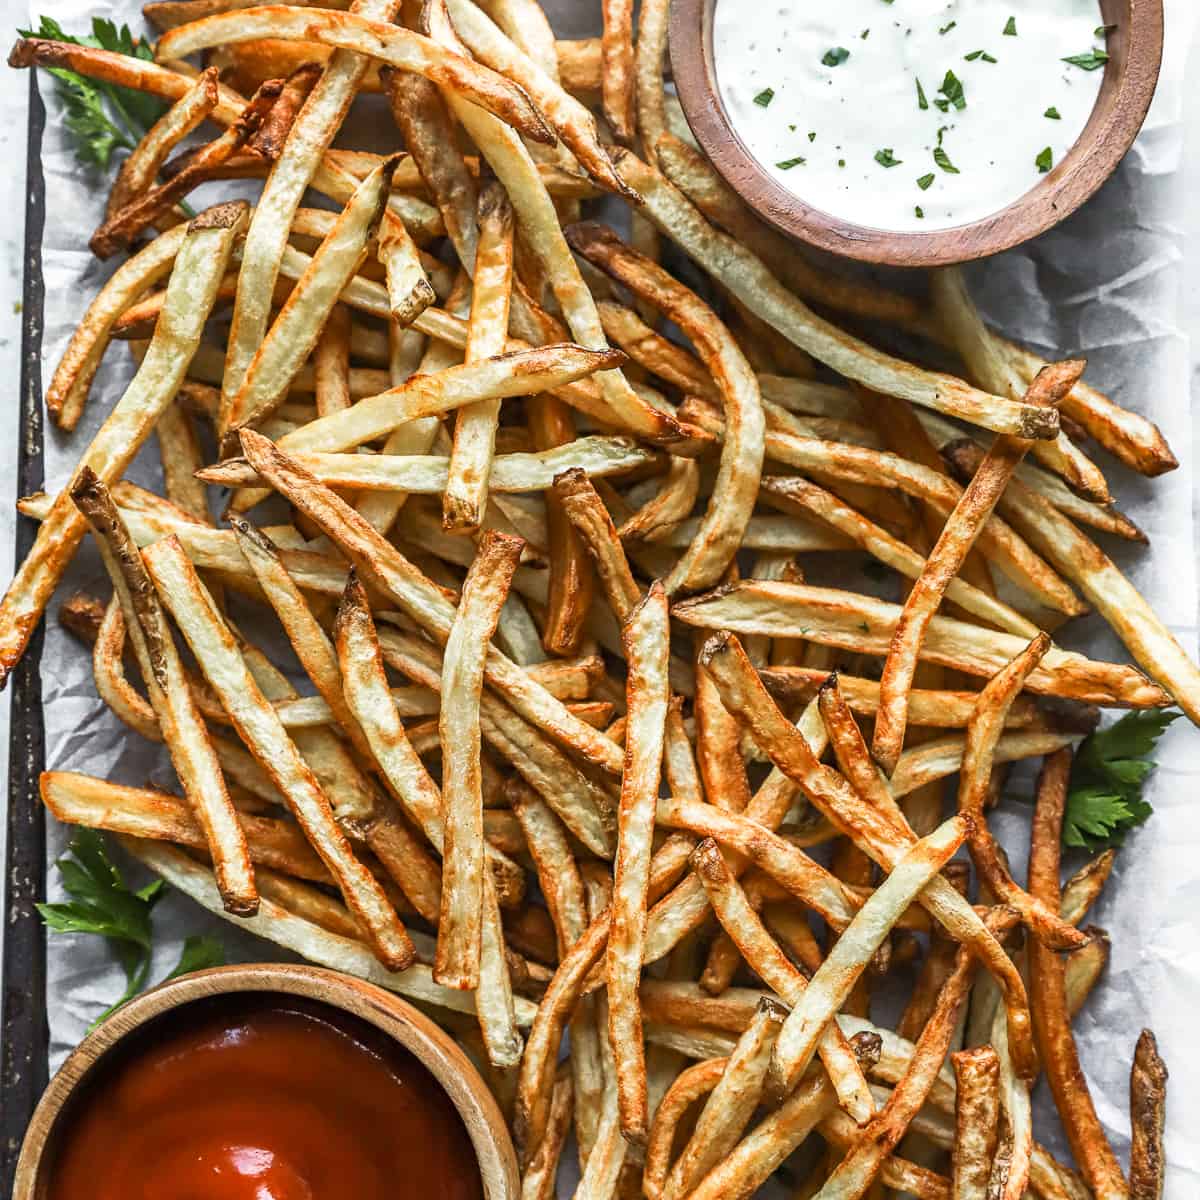 https://www.thecookierookie.com/wp-content/uploads/2023/02/featured-air-fryer-french-fries-recipe.jpg